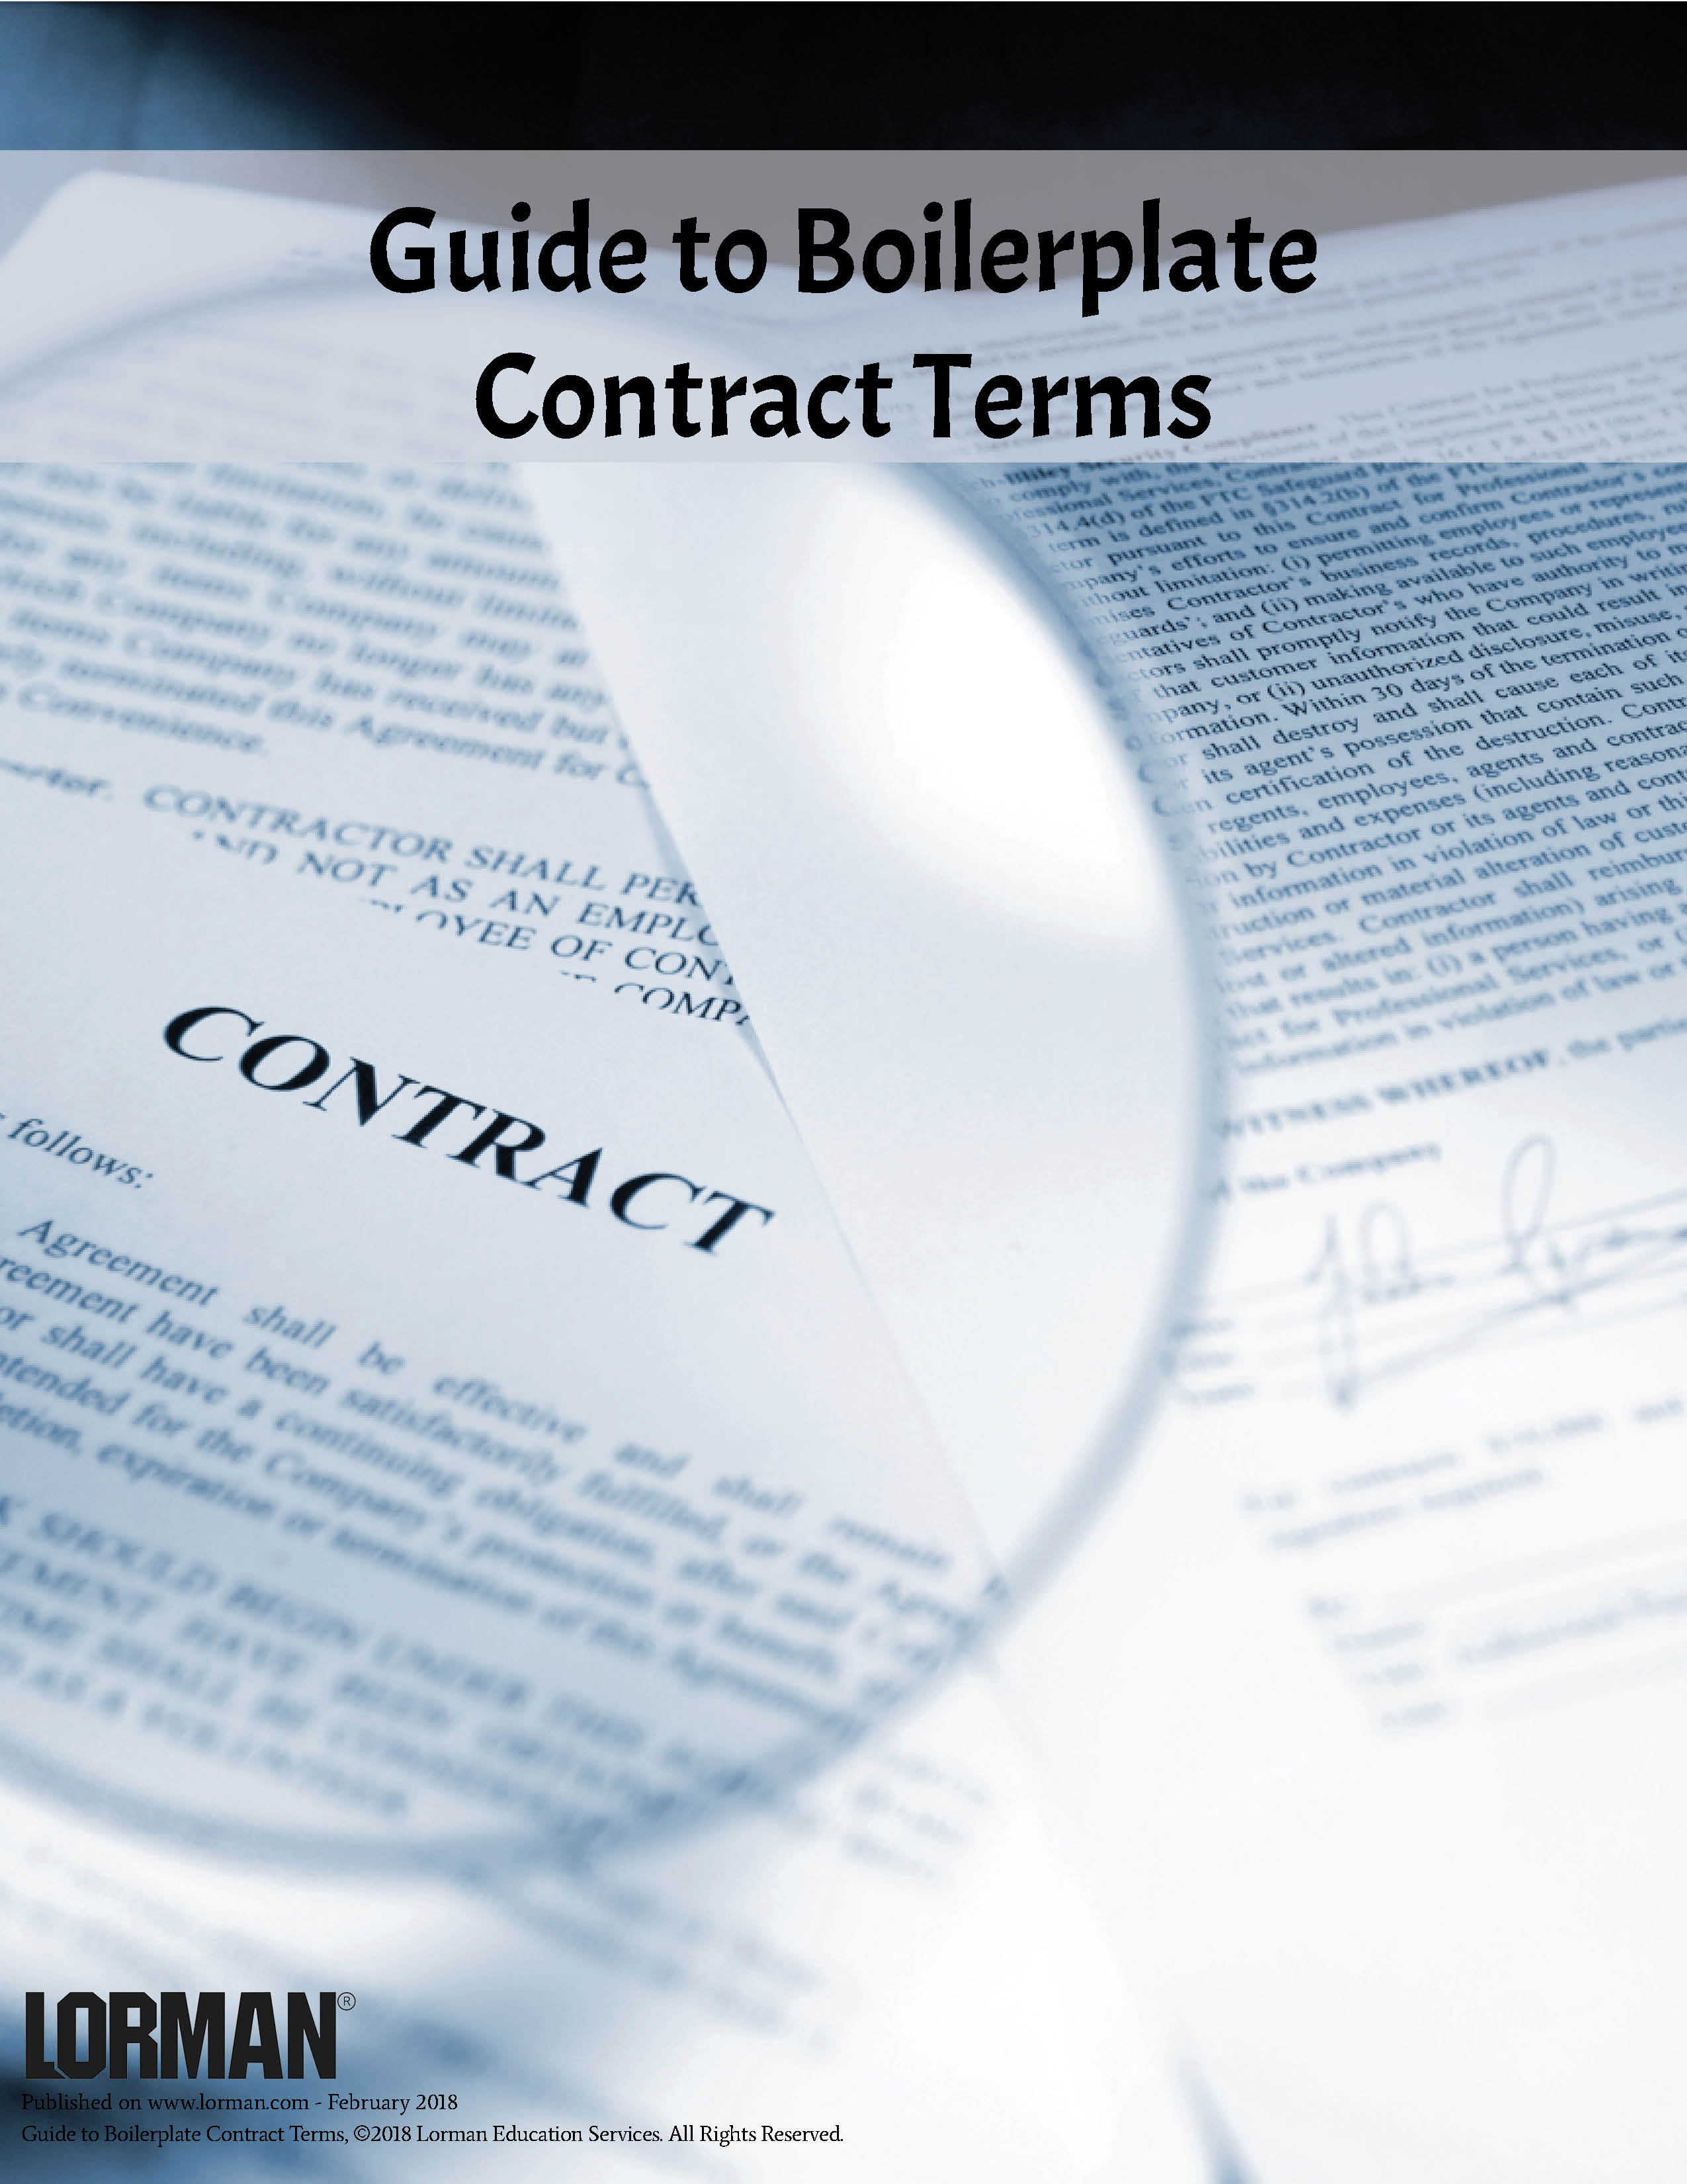 Guide to Boilerplate Contract Terms